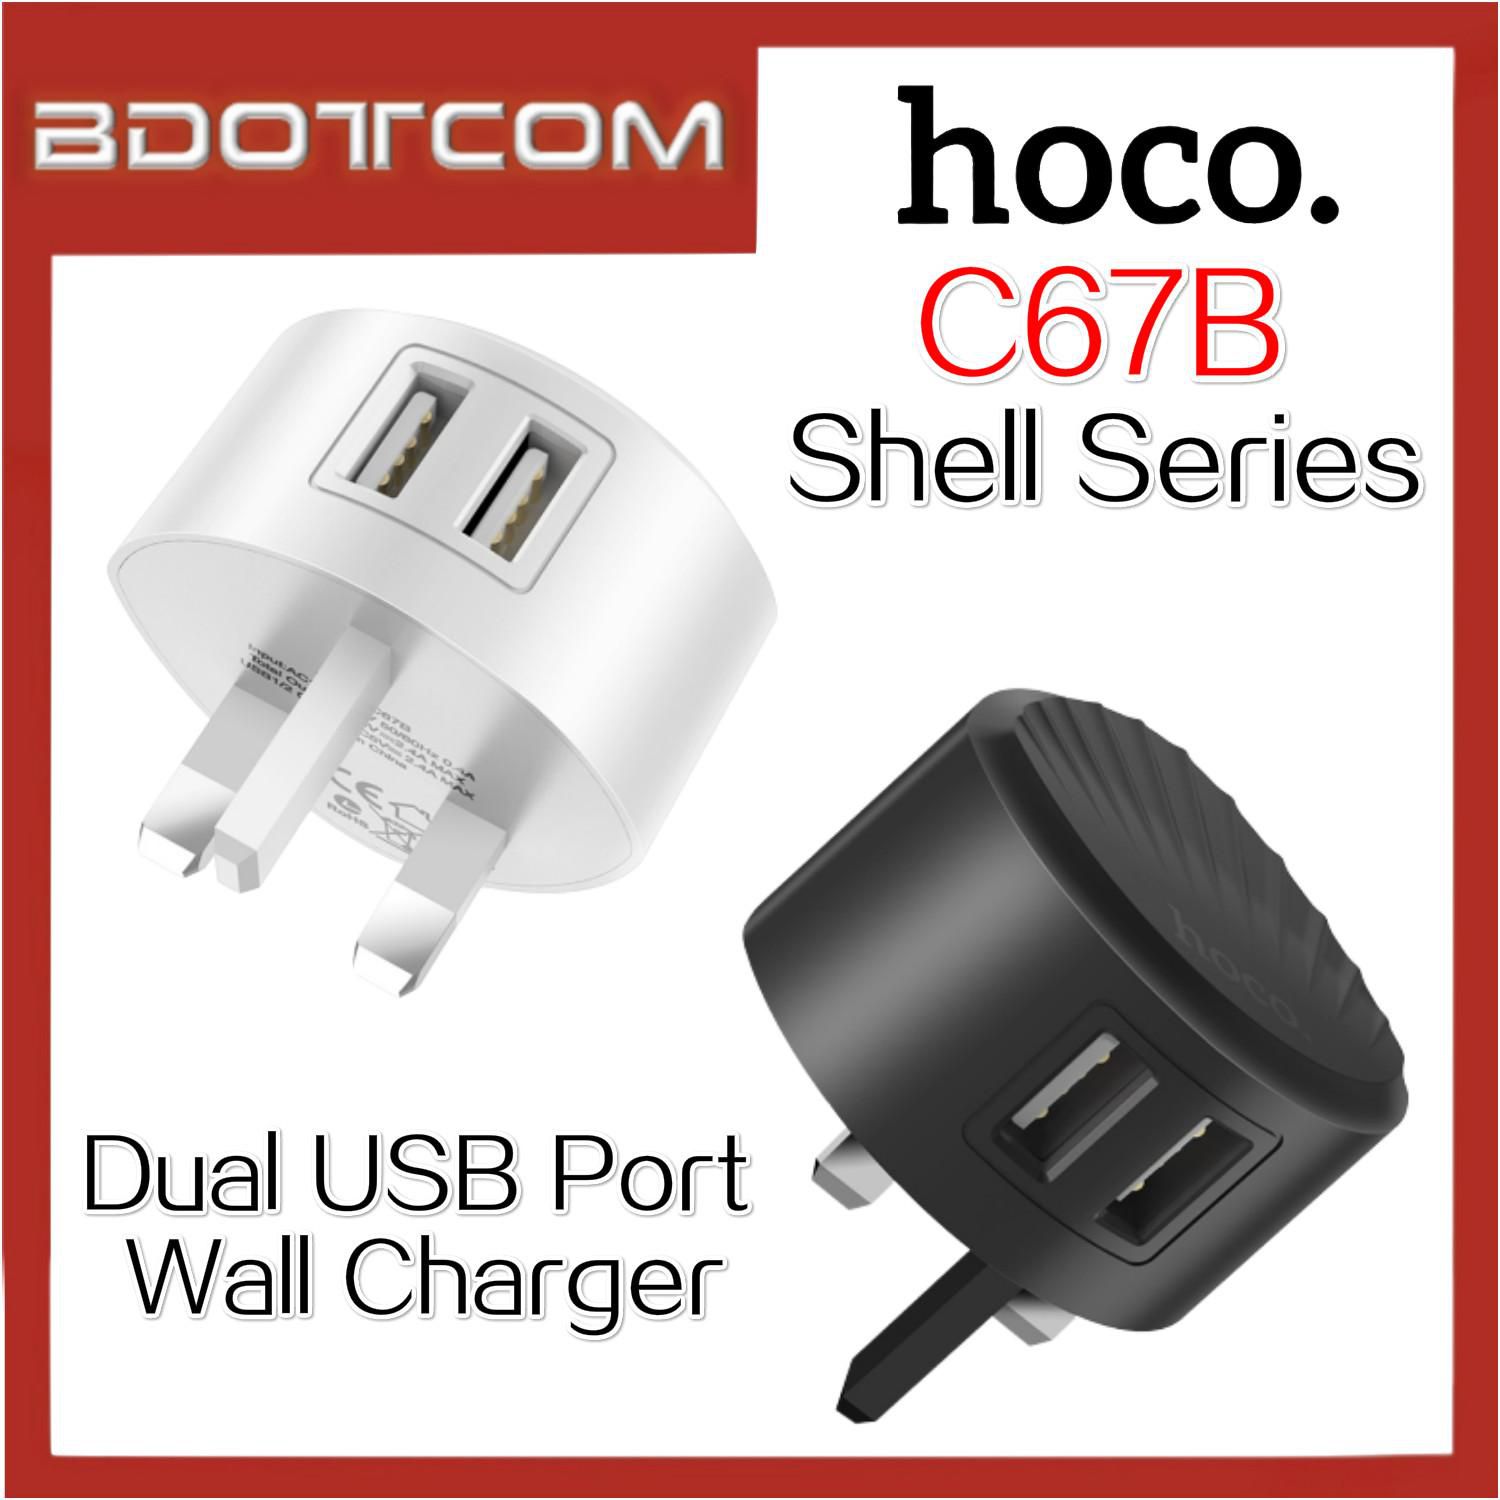 Hoco C67B Shell 2.4A Dual USB Wall Charger Travel Adaptor (2 Colors)